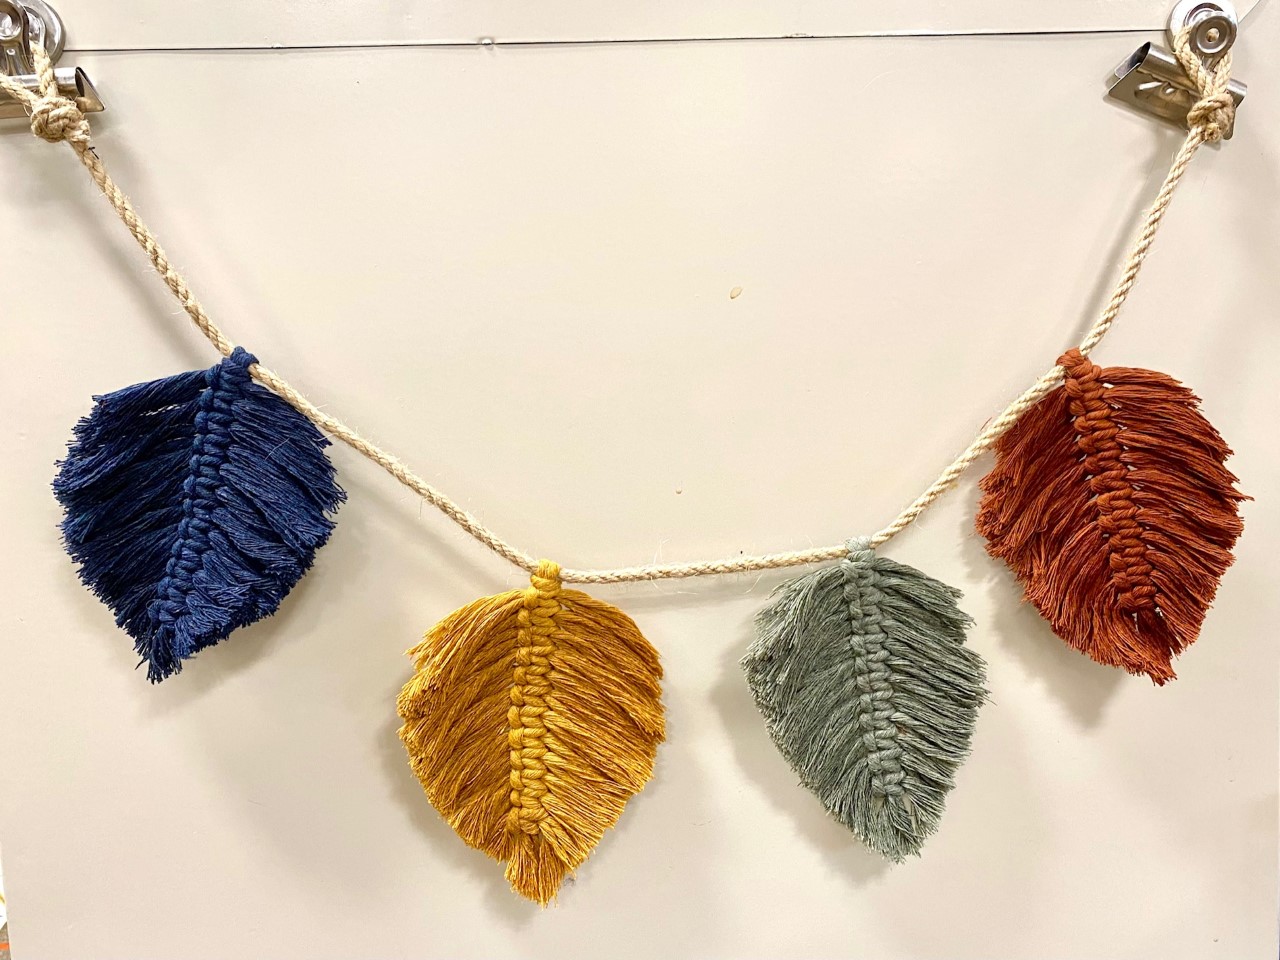 garland with macrame leaves in blue, yellow, green, orange